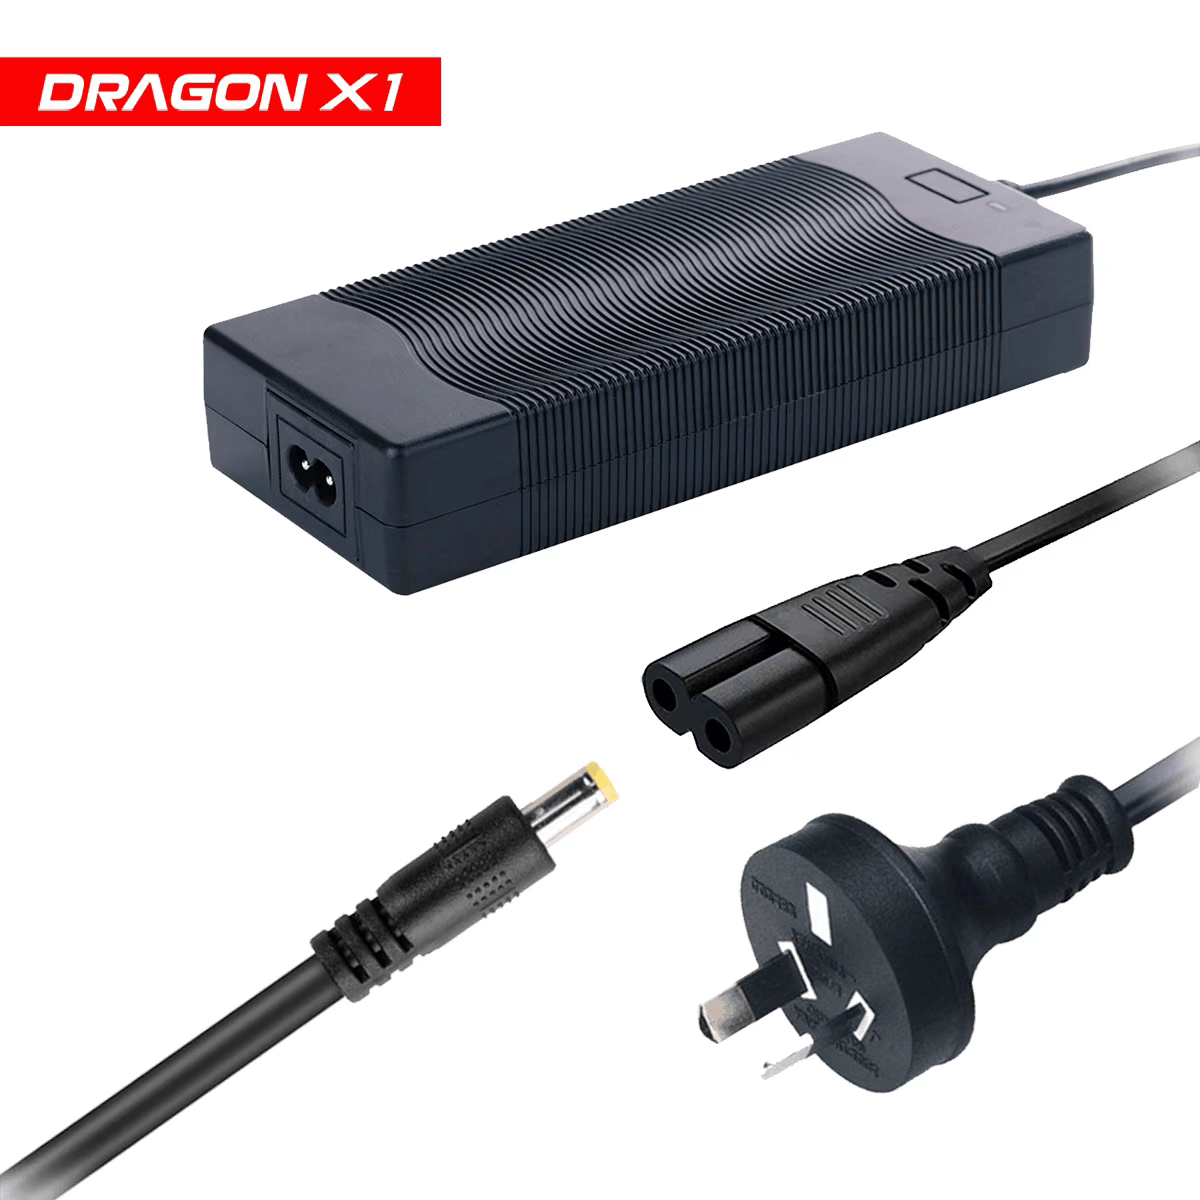 36V ORIGINAL DRAGON CHARGER FOR DRAGON X1 ELECTRIC SCOOTER - Bike Scooter City